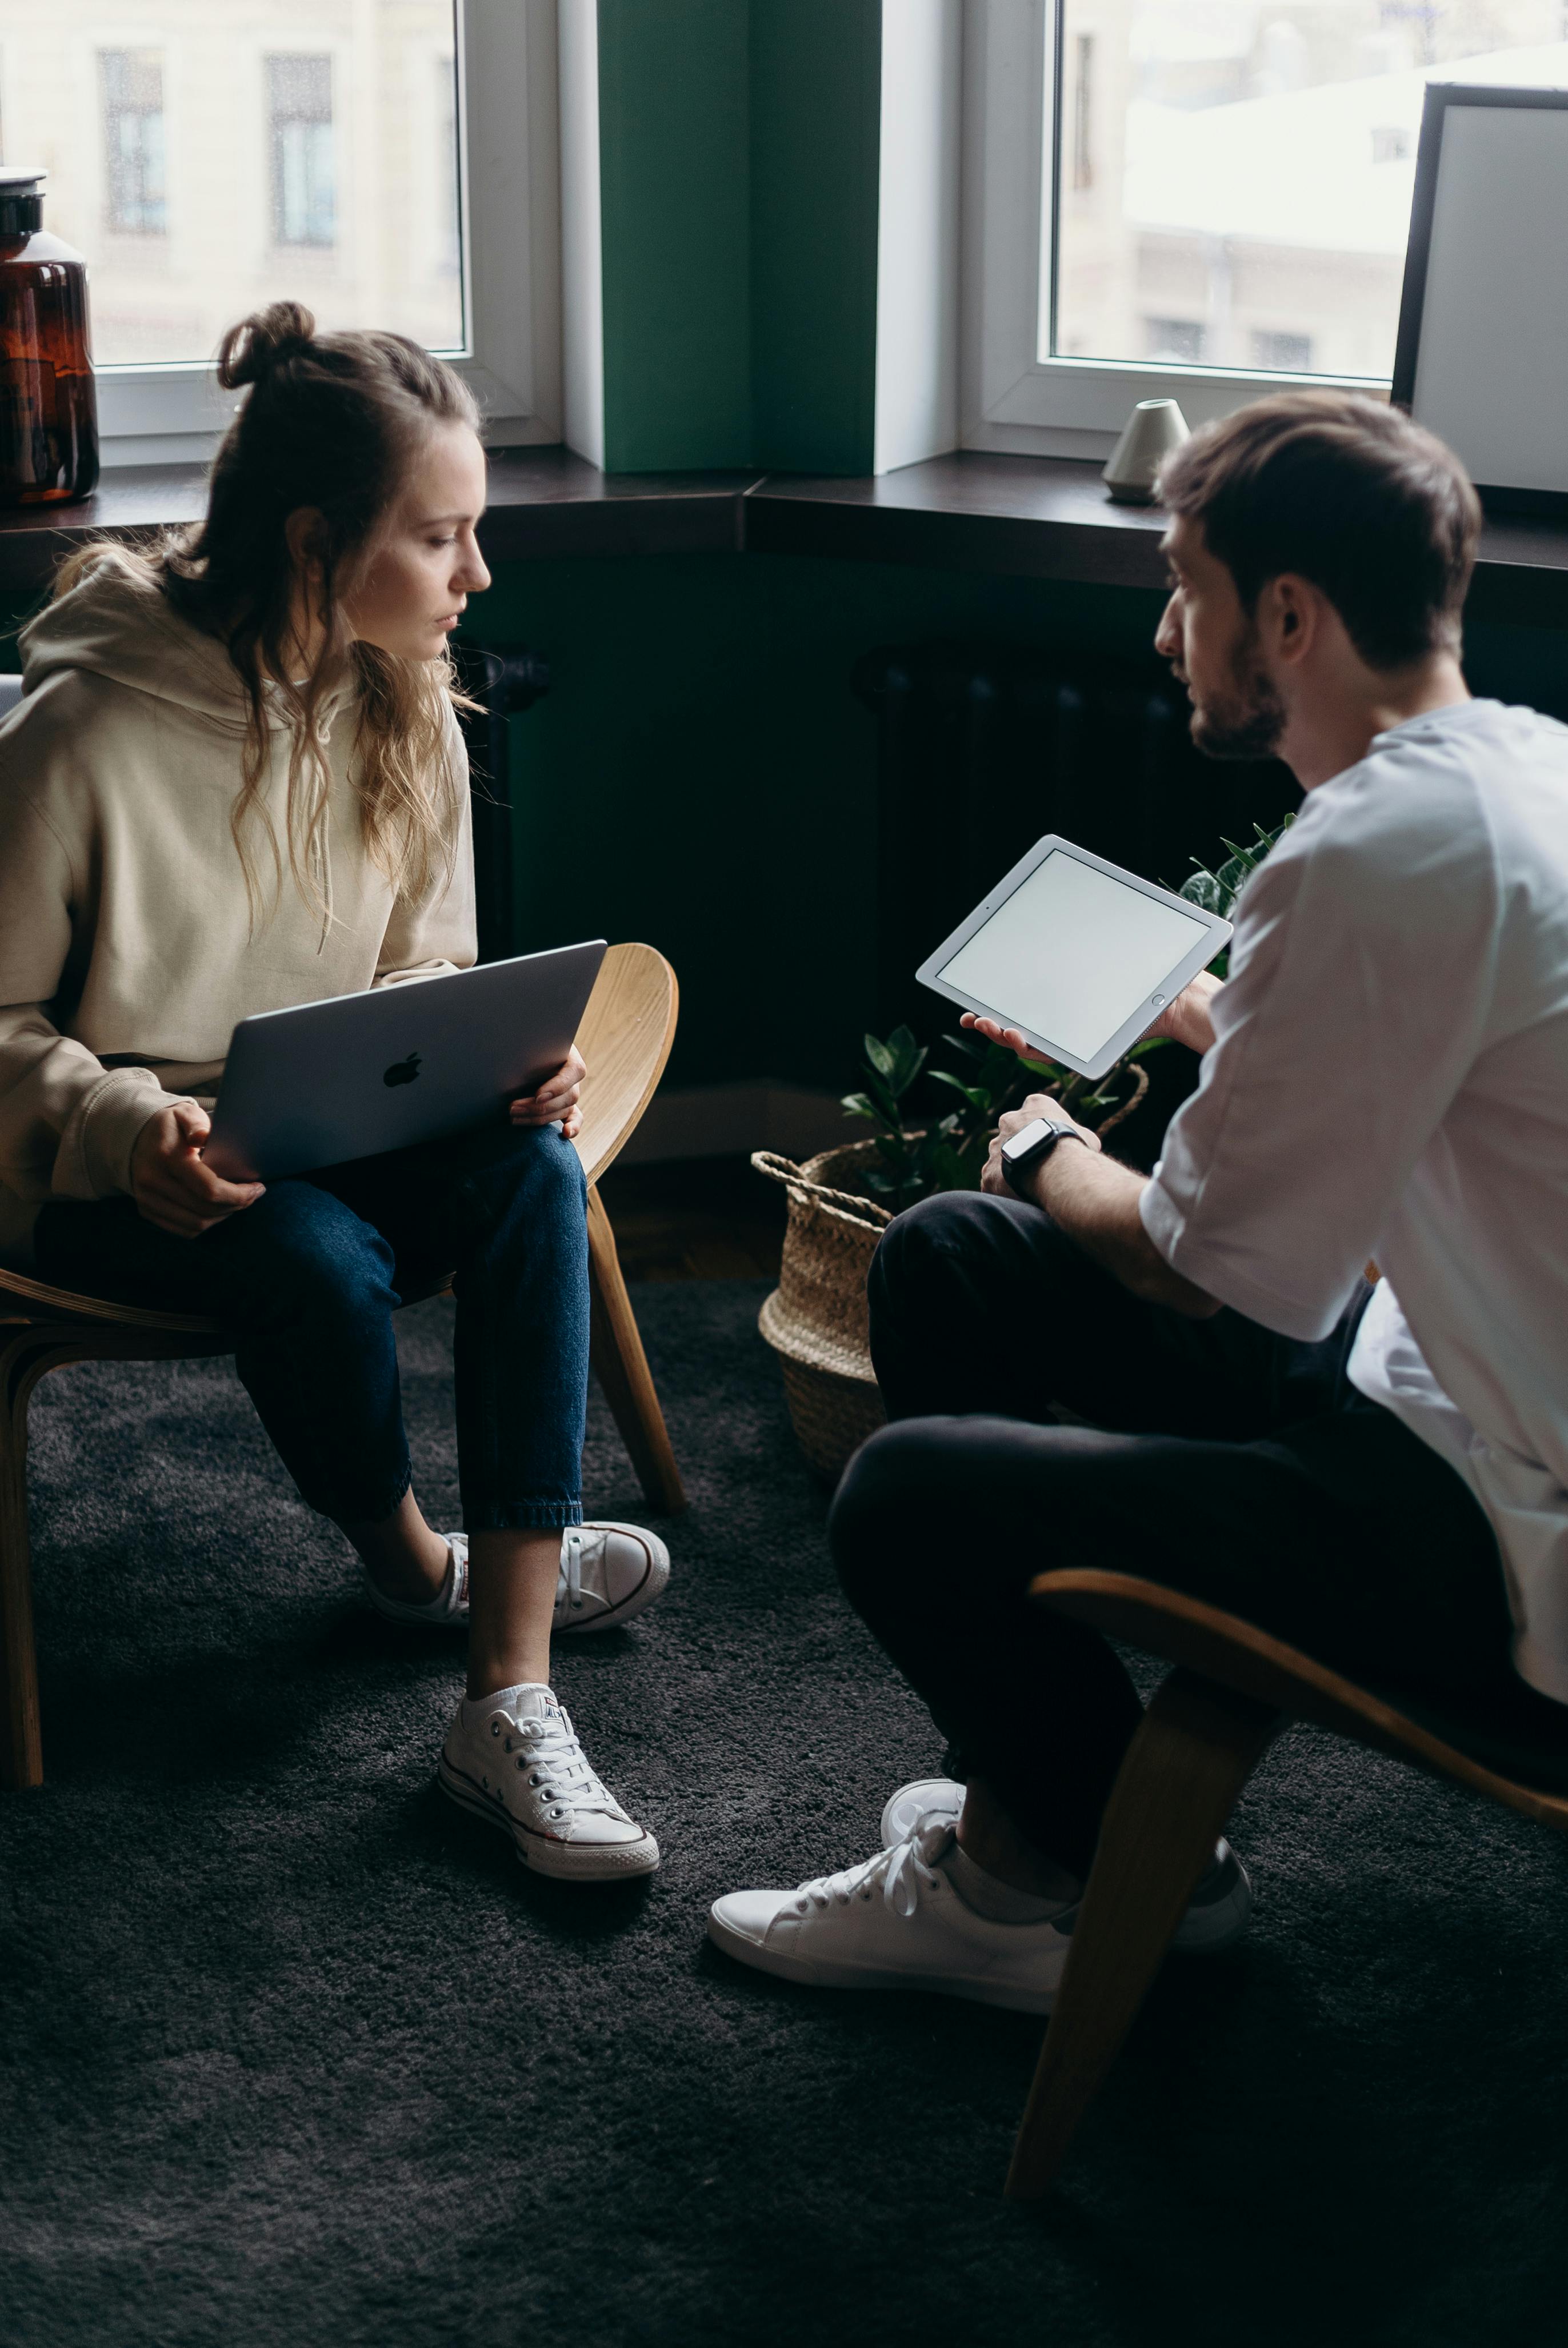 A man and woman with a laptop and tablet | Source: Pexels